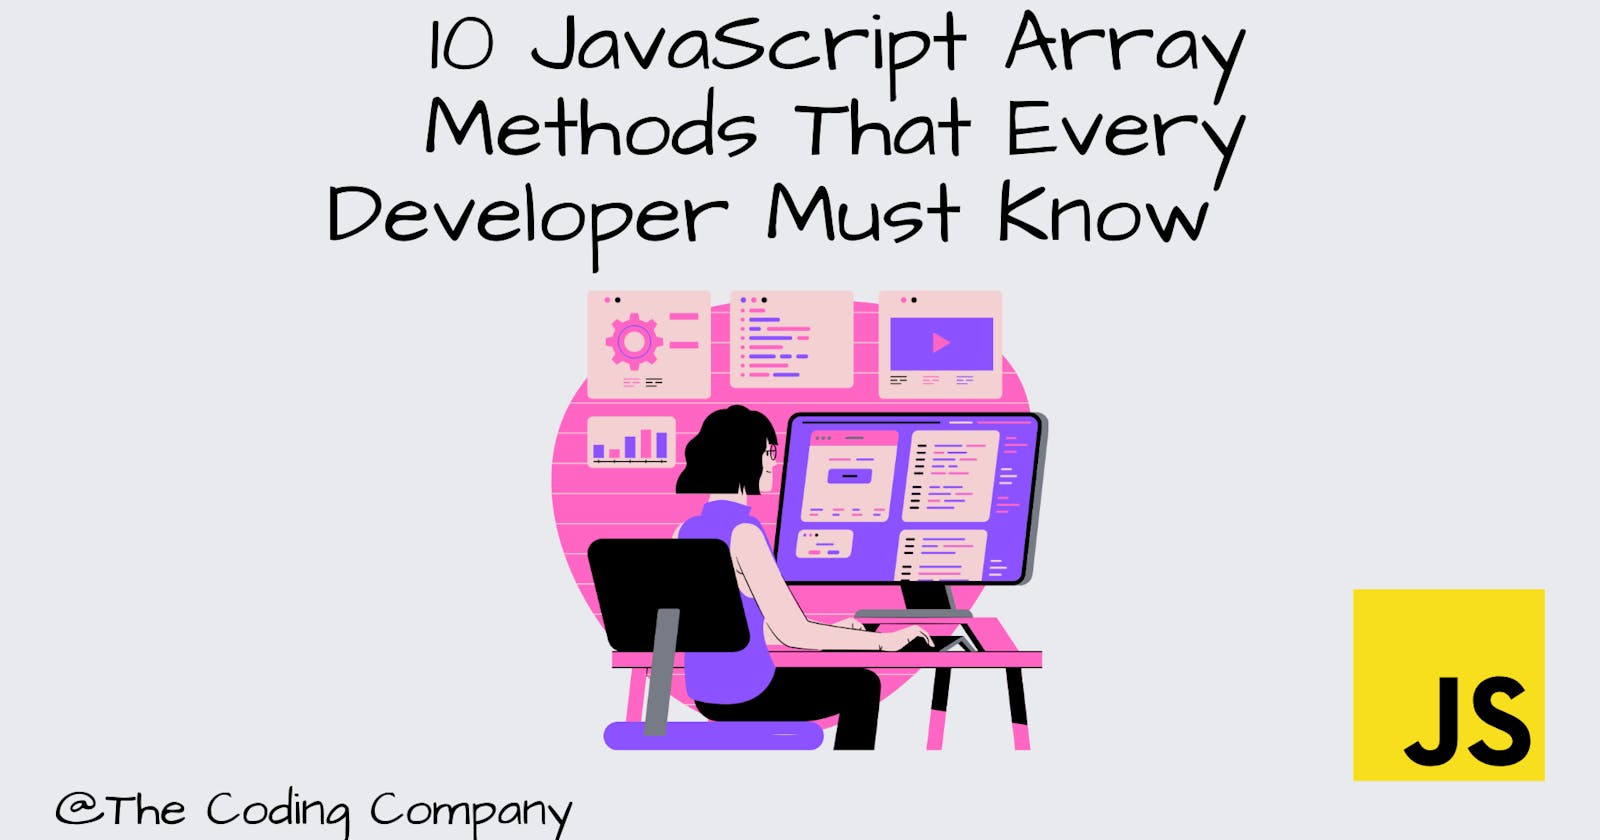 10 JavaScript Array Methods That Every Developer Must Know